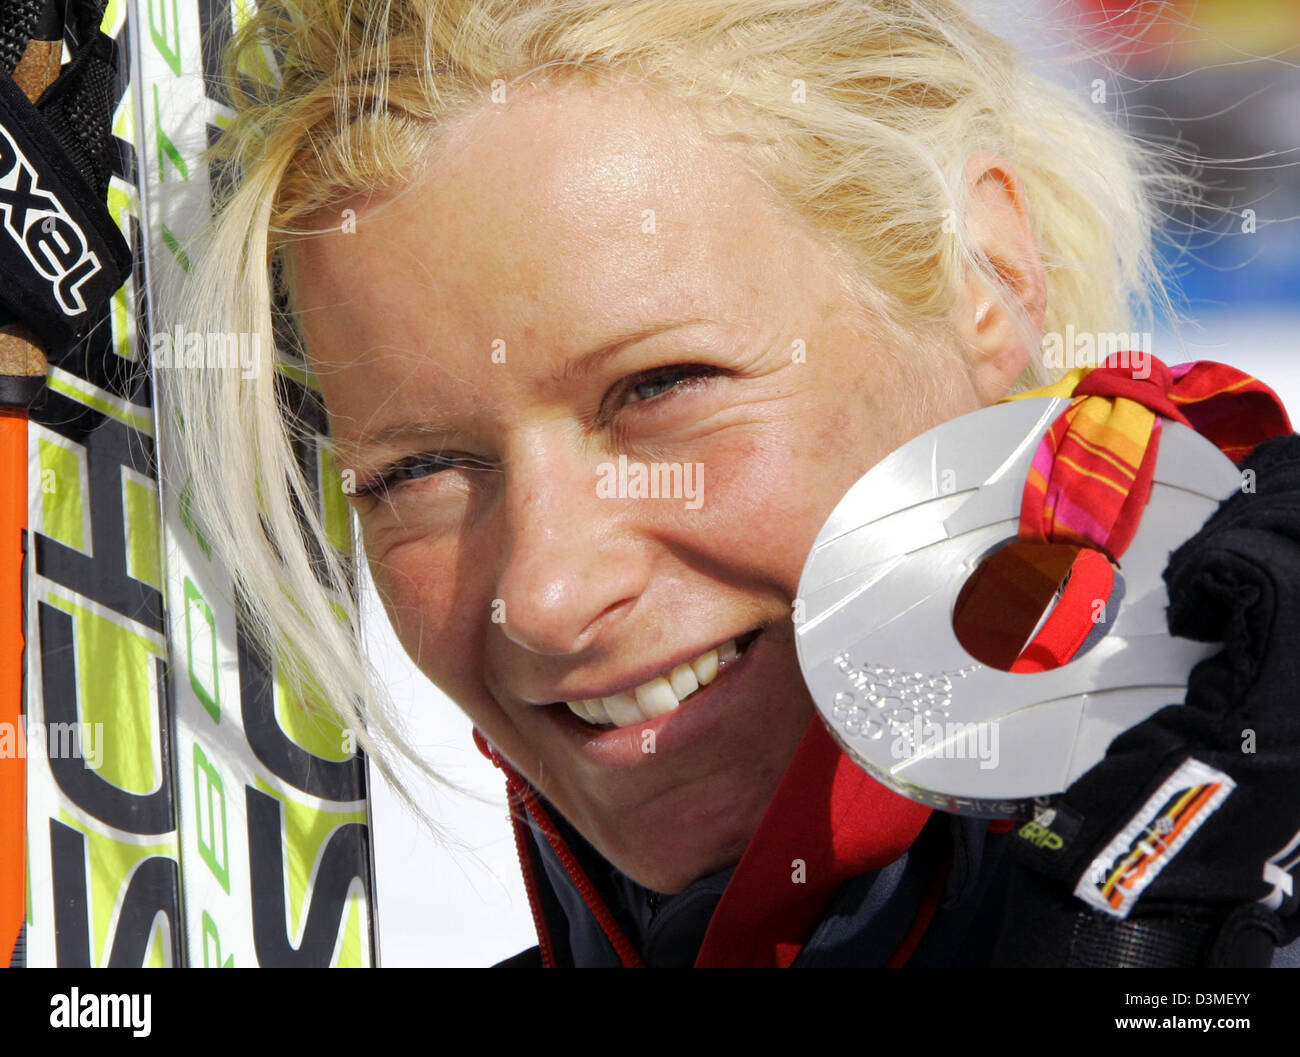 German cross-country skier Claudia Kuenzel presents her silver medal after coming in second in the Women's 1.1 km Cross-Country Sprint event at the Turin Winter Olympics in Pragelato Plan, Italy, Wednesday, 22 February 2006. Photo: Bernd Thissen Stock Photo